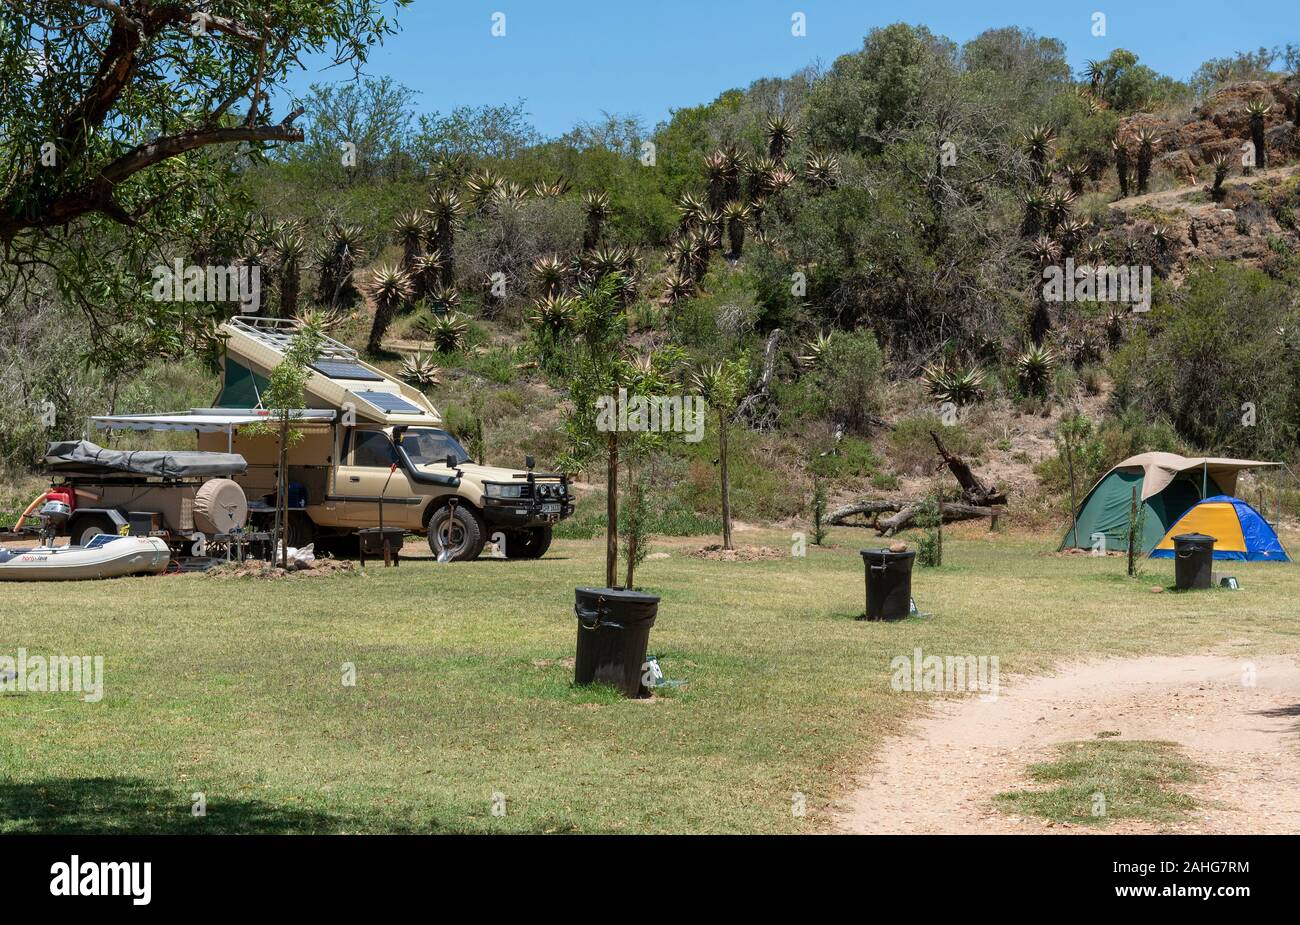 Swellendam, Western Cape, South Africa. December 2019. Vechicle with a tent ontop at Aloe Hill Bontebok along the Garden Route. Stock Photo